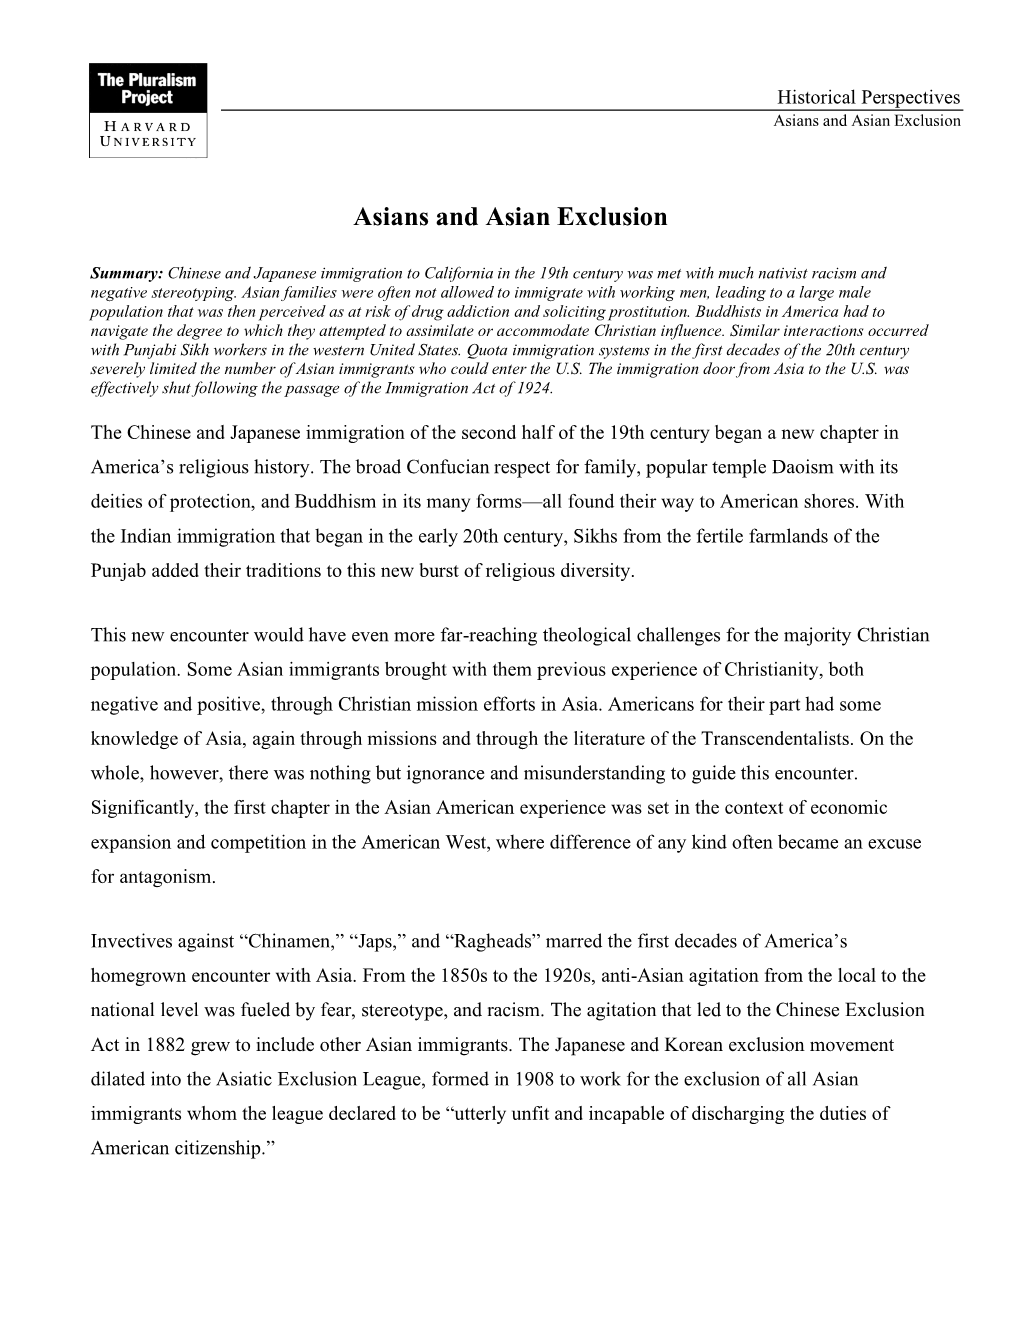 Asians and Asian Exclusion